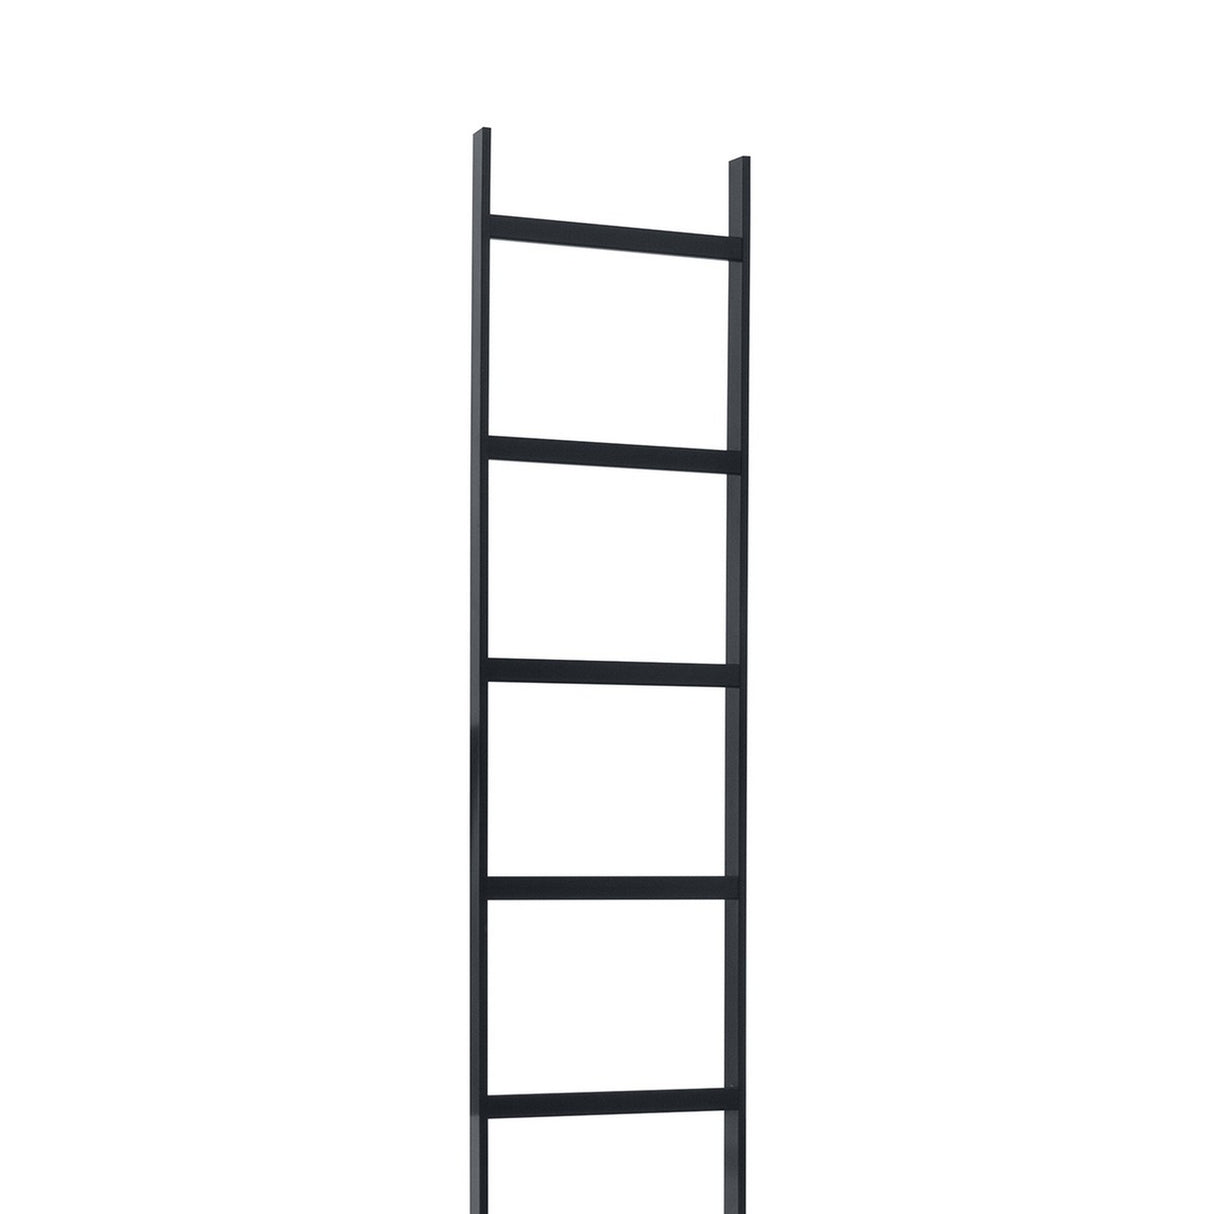 Lowell CL-1810 18-Inch Wide Cable Ladder, Straight